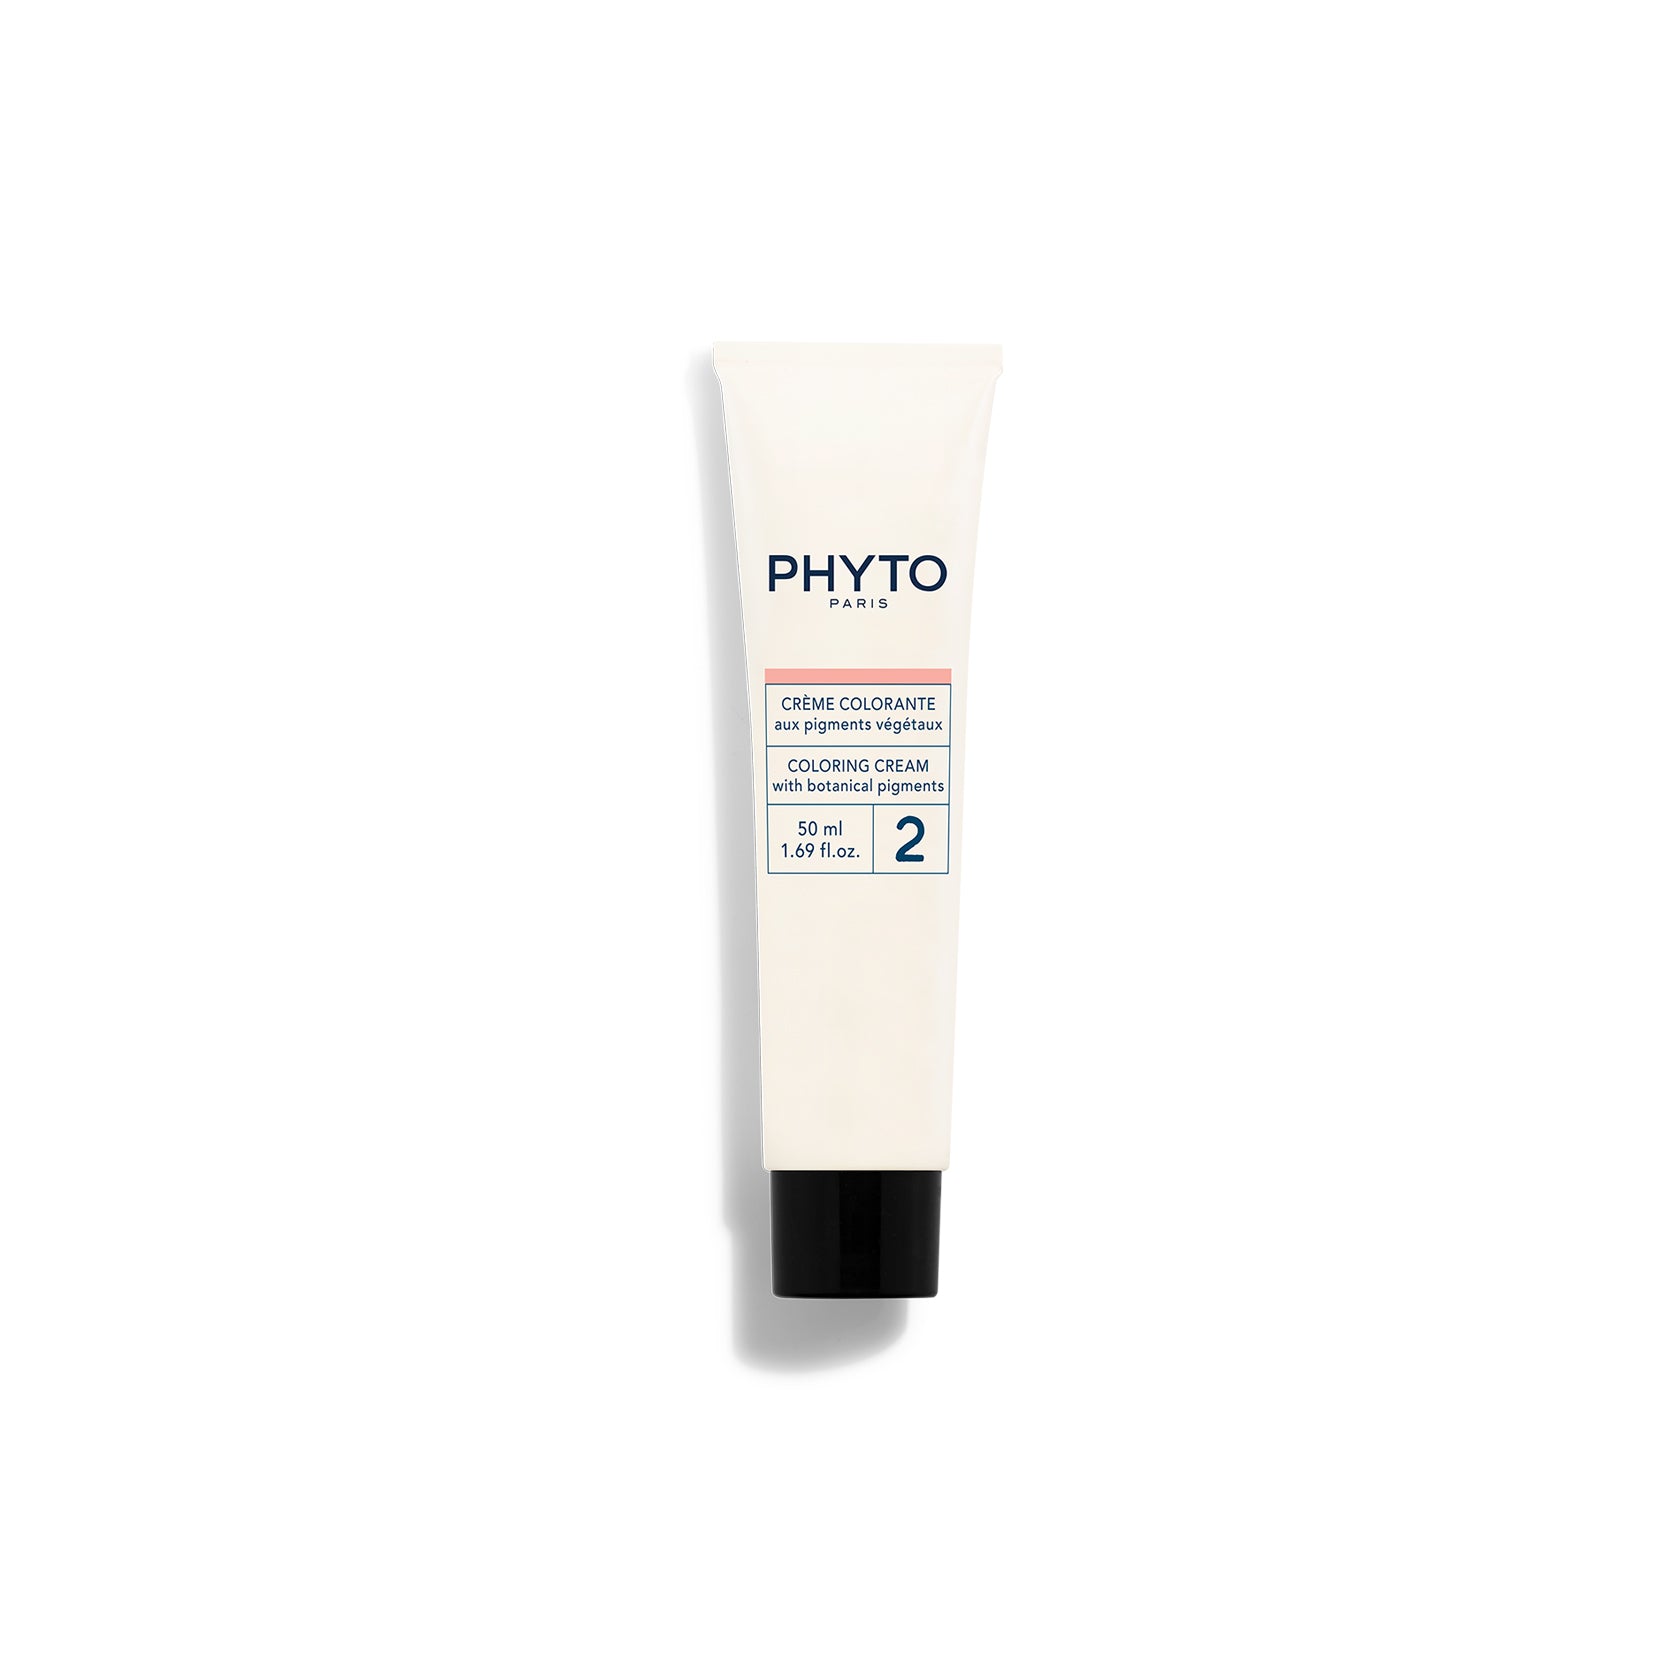 Phytocolor Permanent Color Shade 1 Black